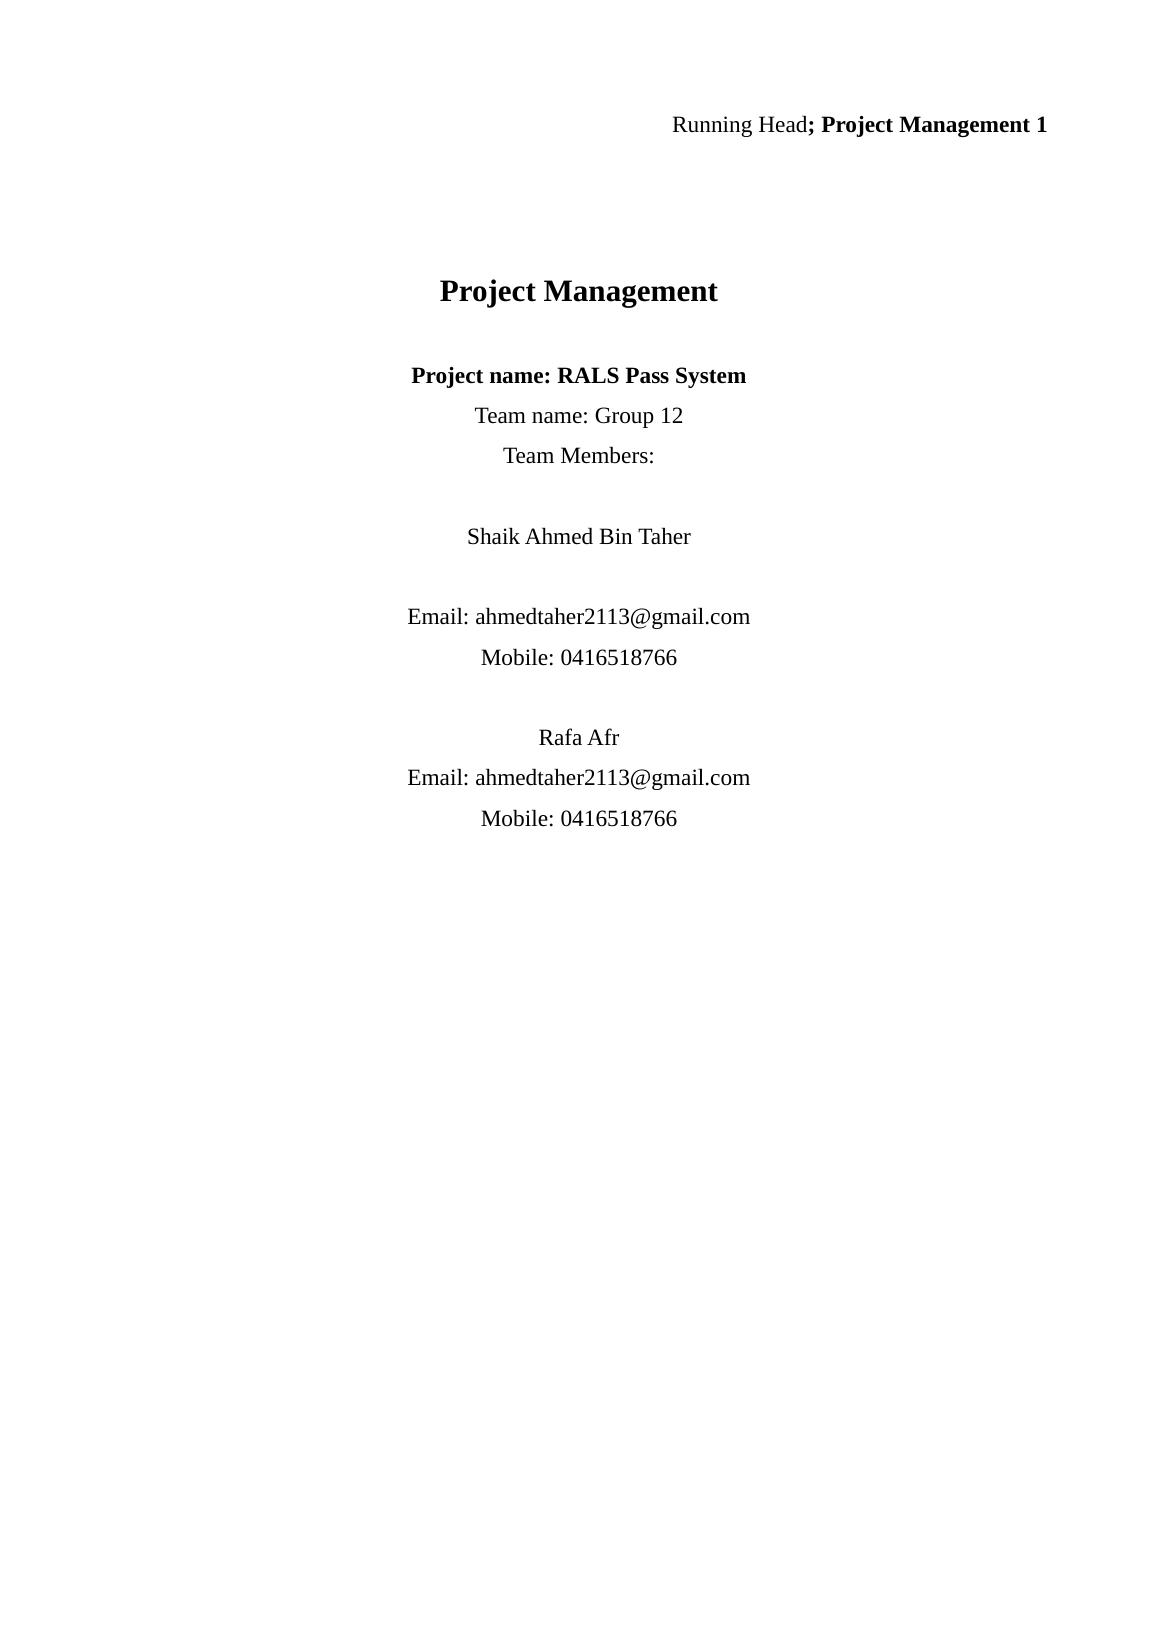 Assignment of Project Management - RALS Pass System_1